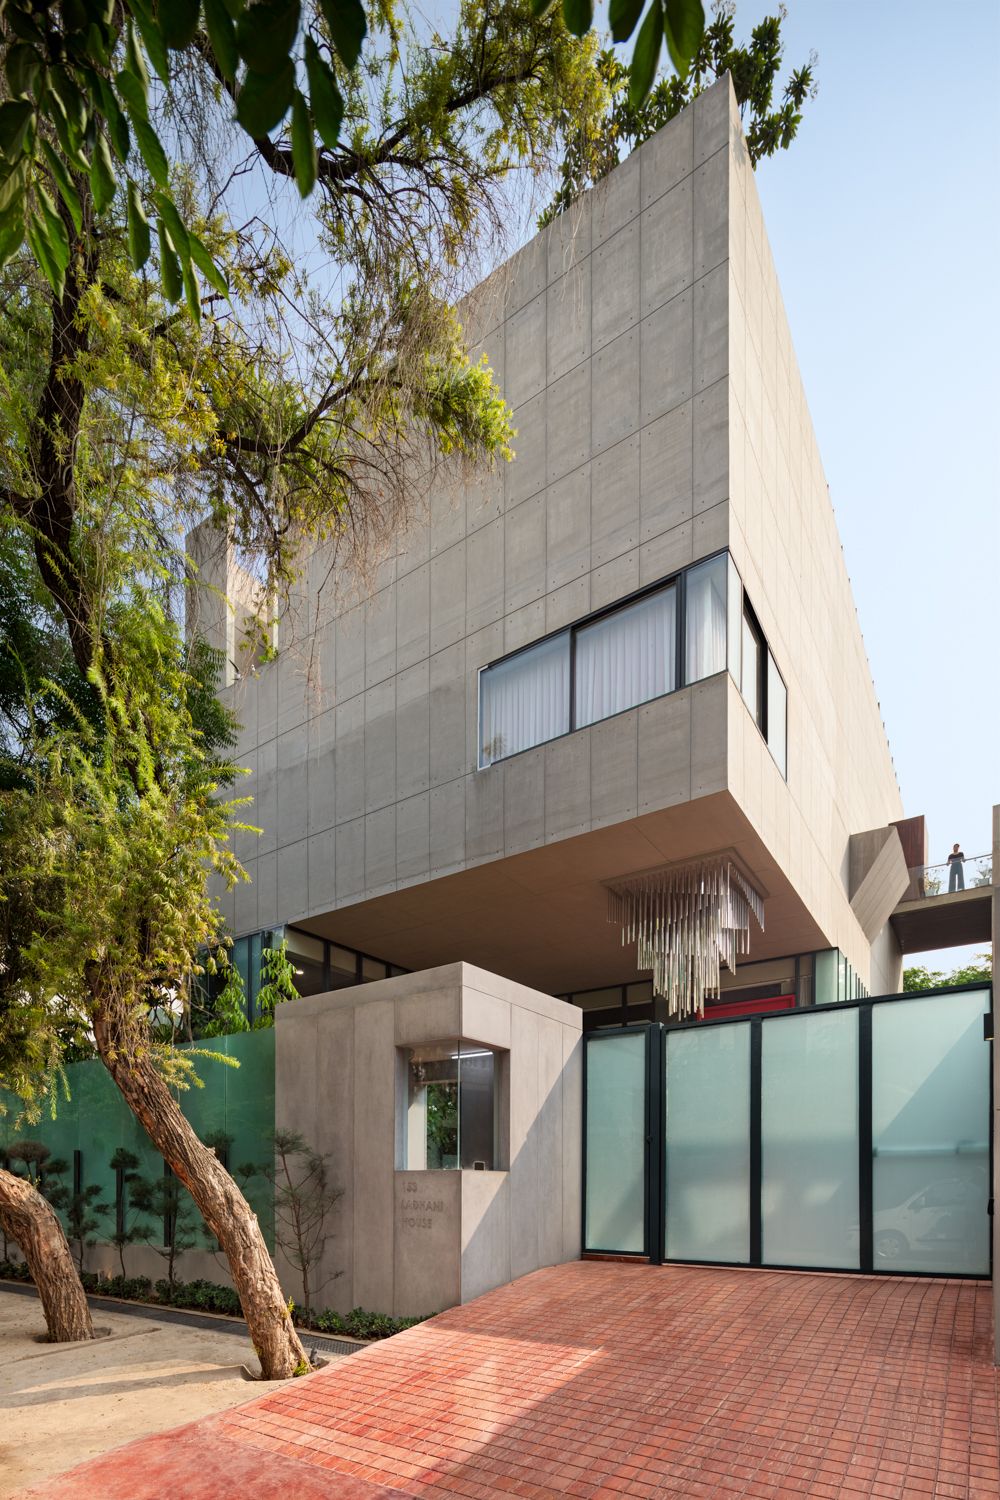 Archohm’s concrete home in Noida is designed to hang, redefining standards of luxury